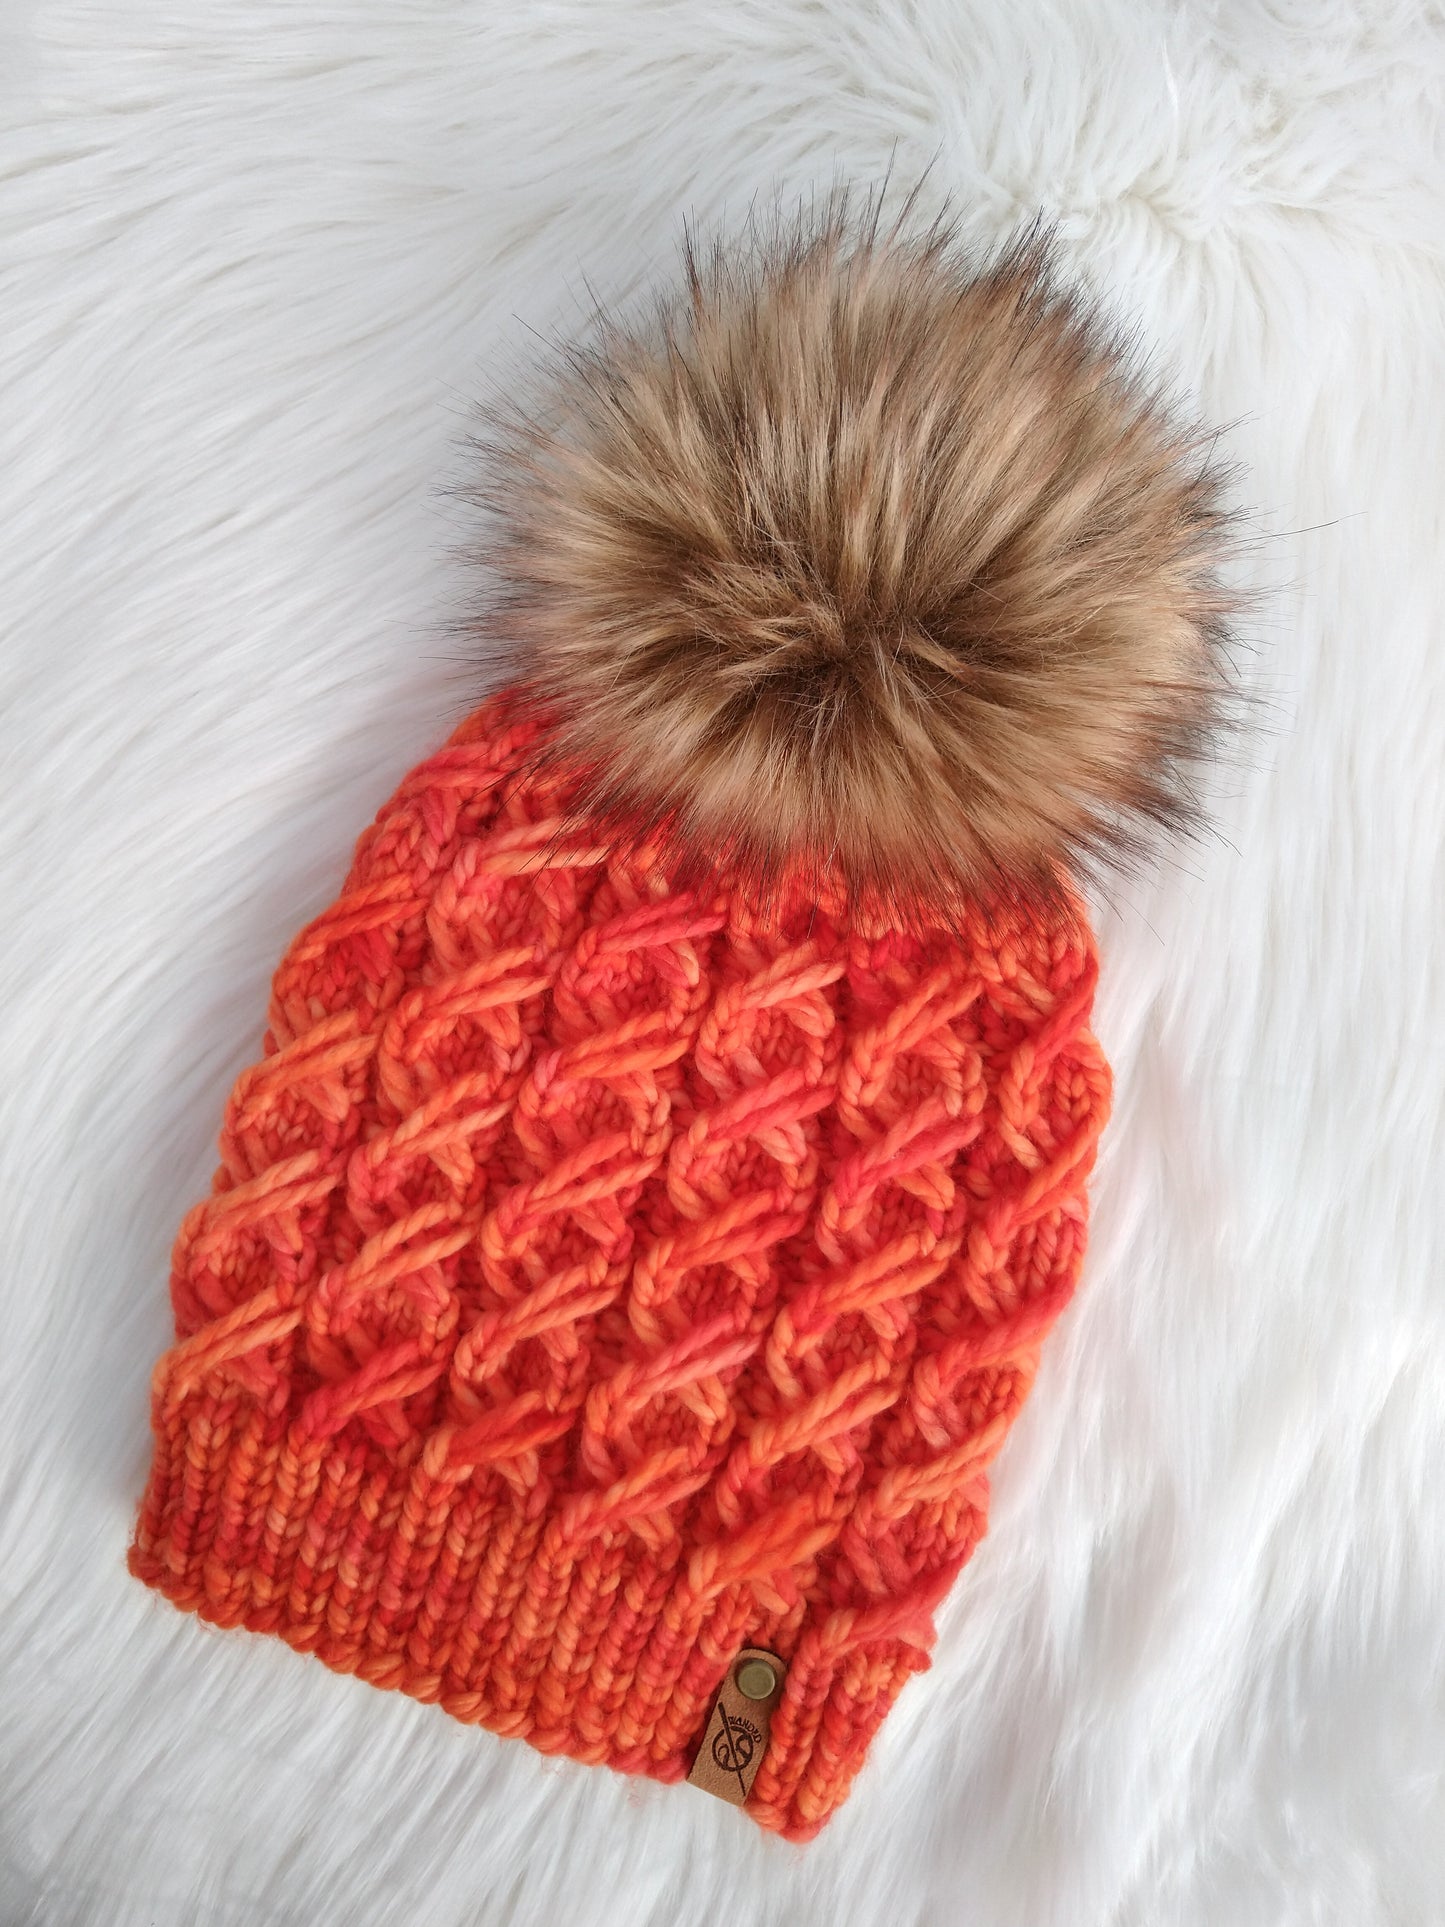 Unbreakable Vow Toque Knitting Pattern